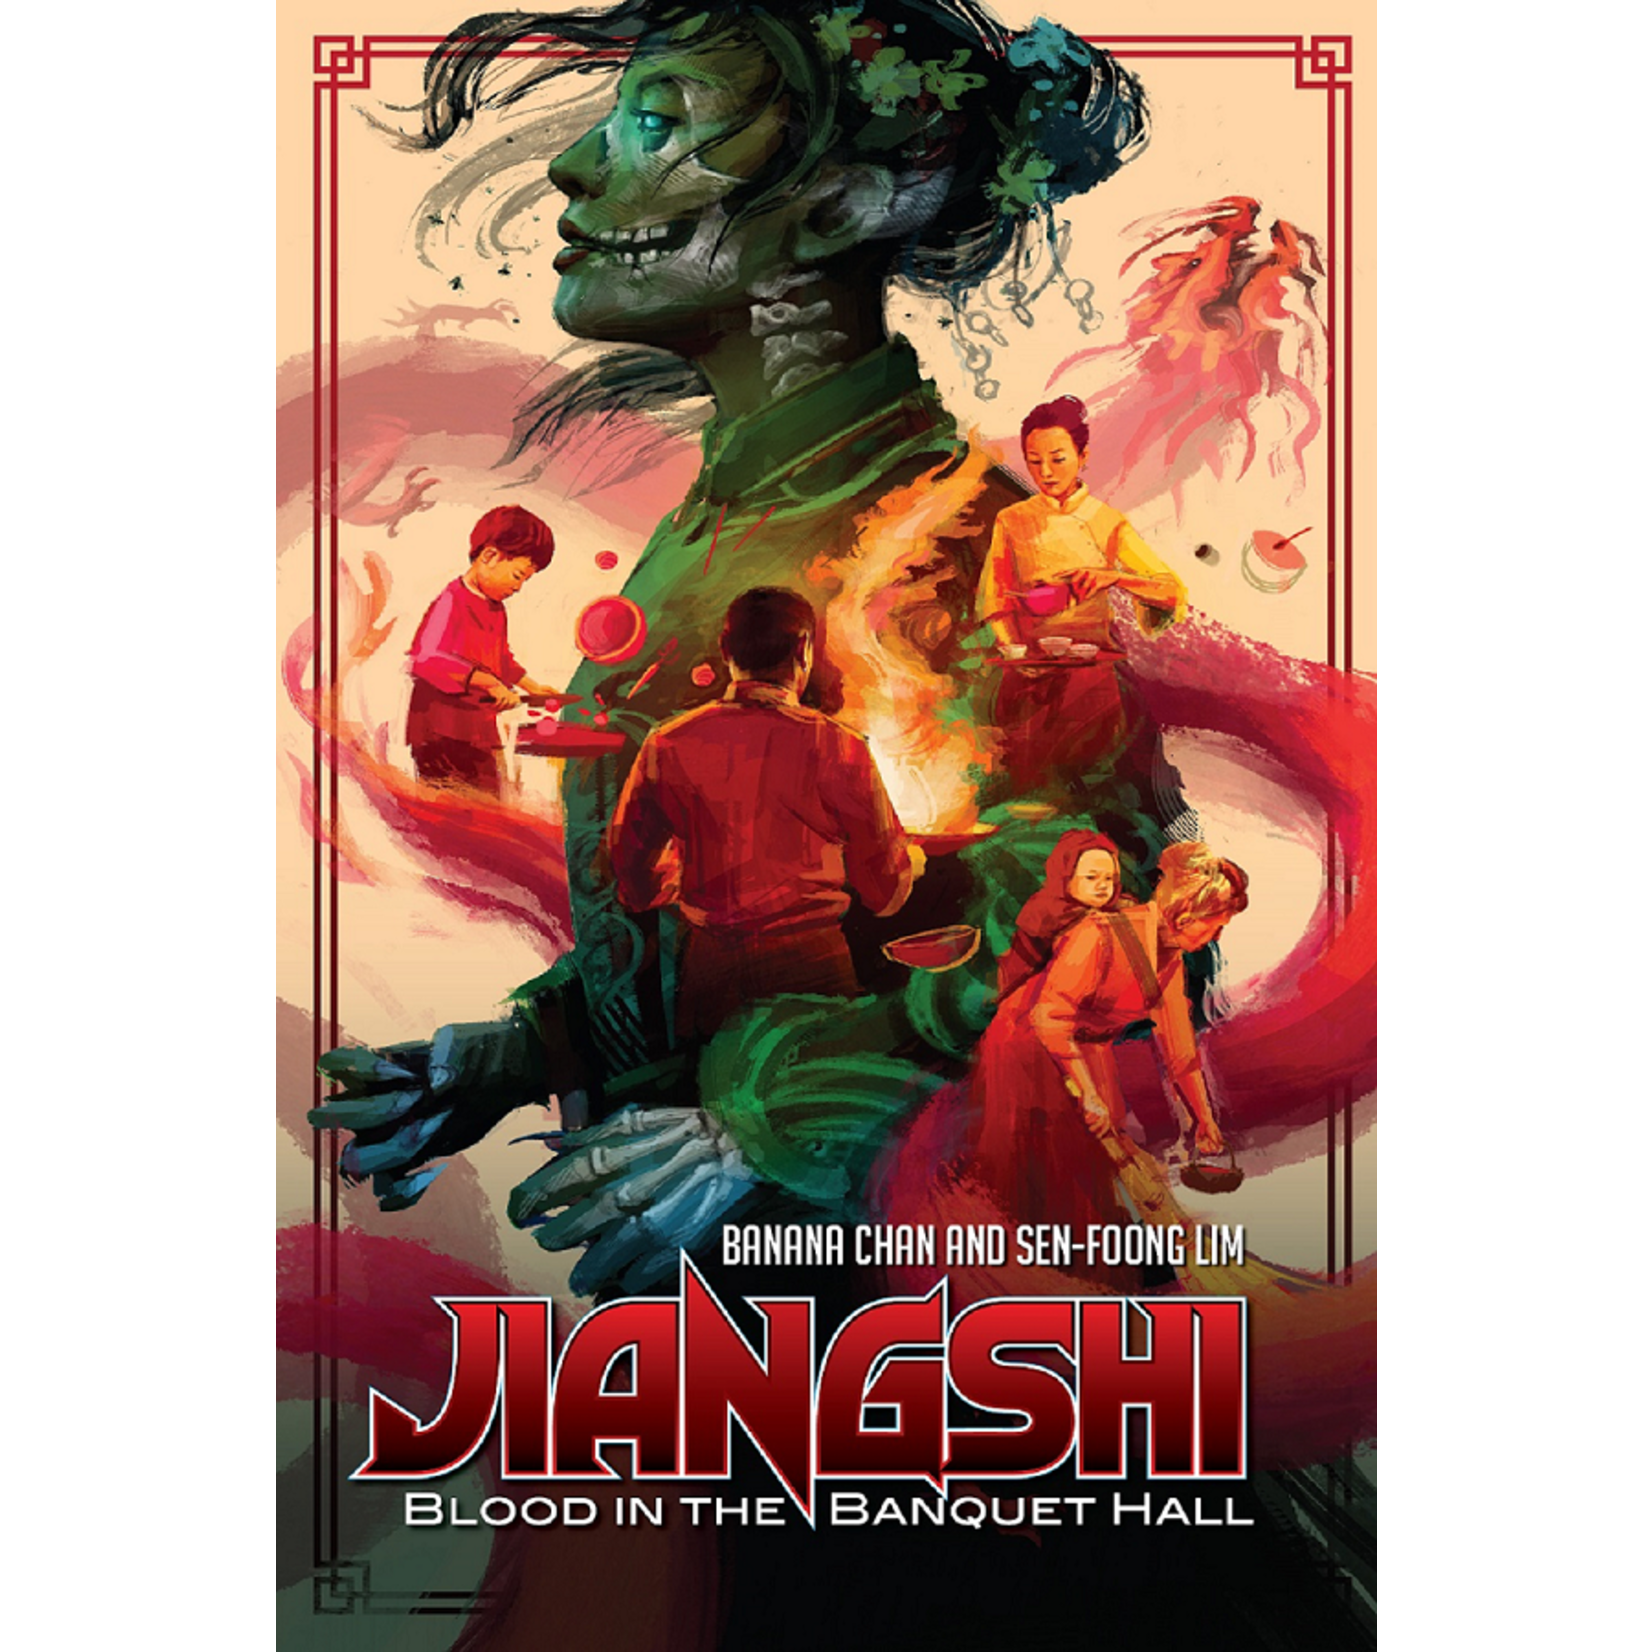 Indie Press Revolution Jiangshi: Blood in the Banquet Hall